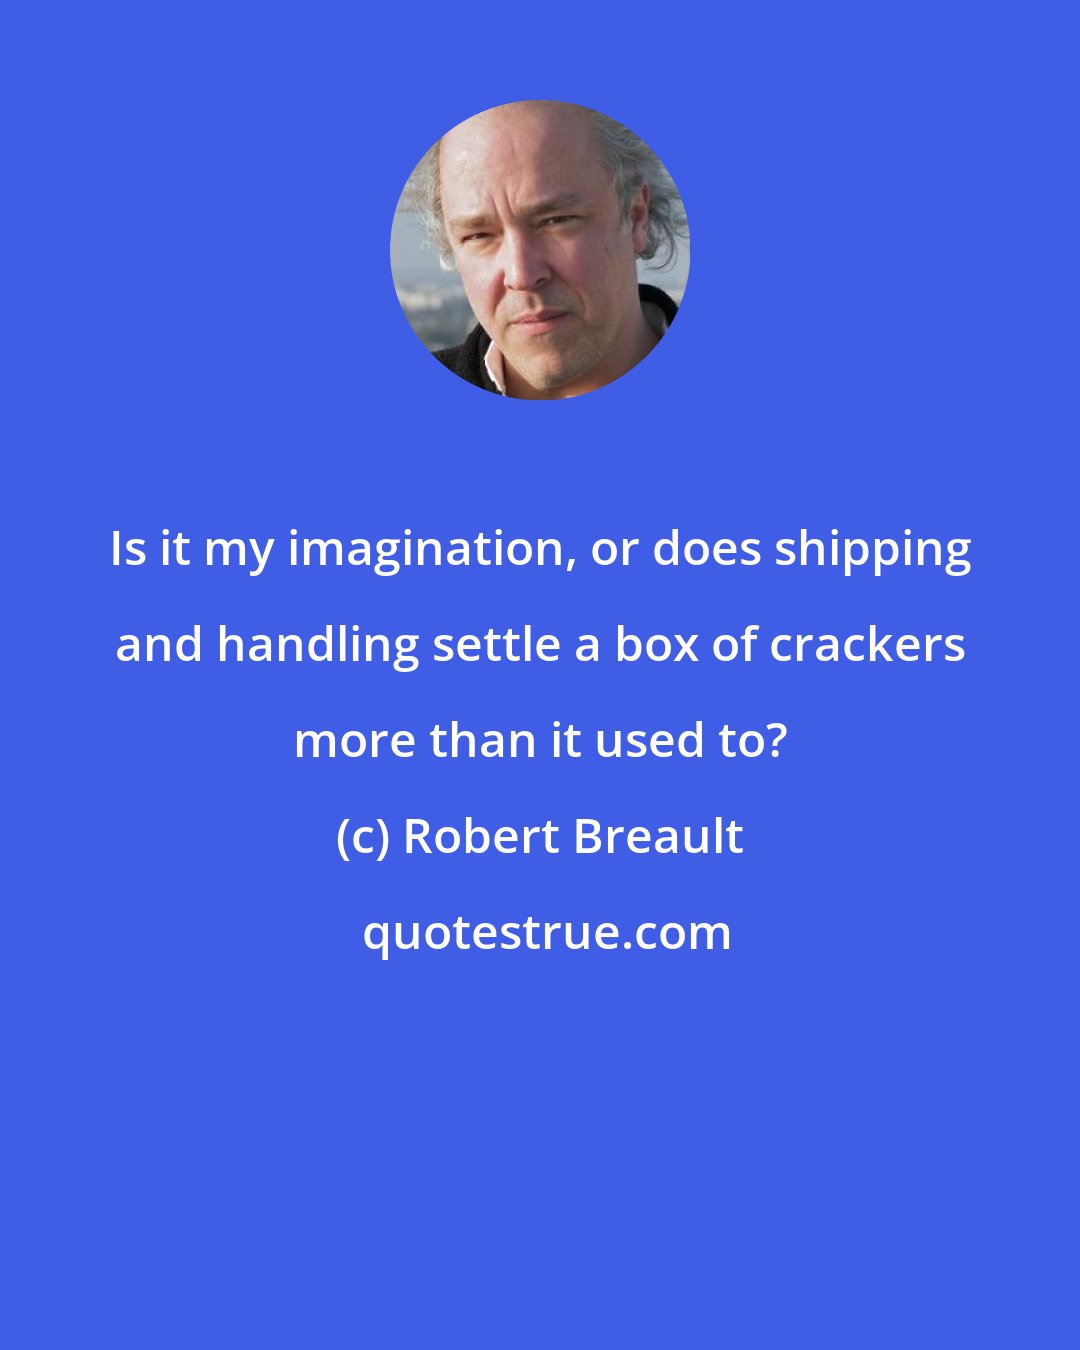 Robert Breault: Is it my imagination, or does shipping and handling settle a box of crackers more than it used to?